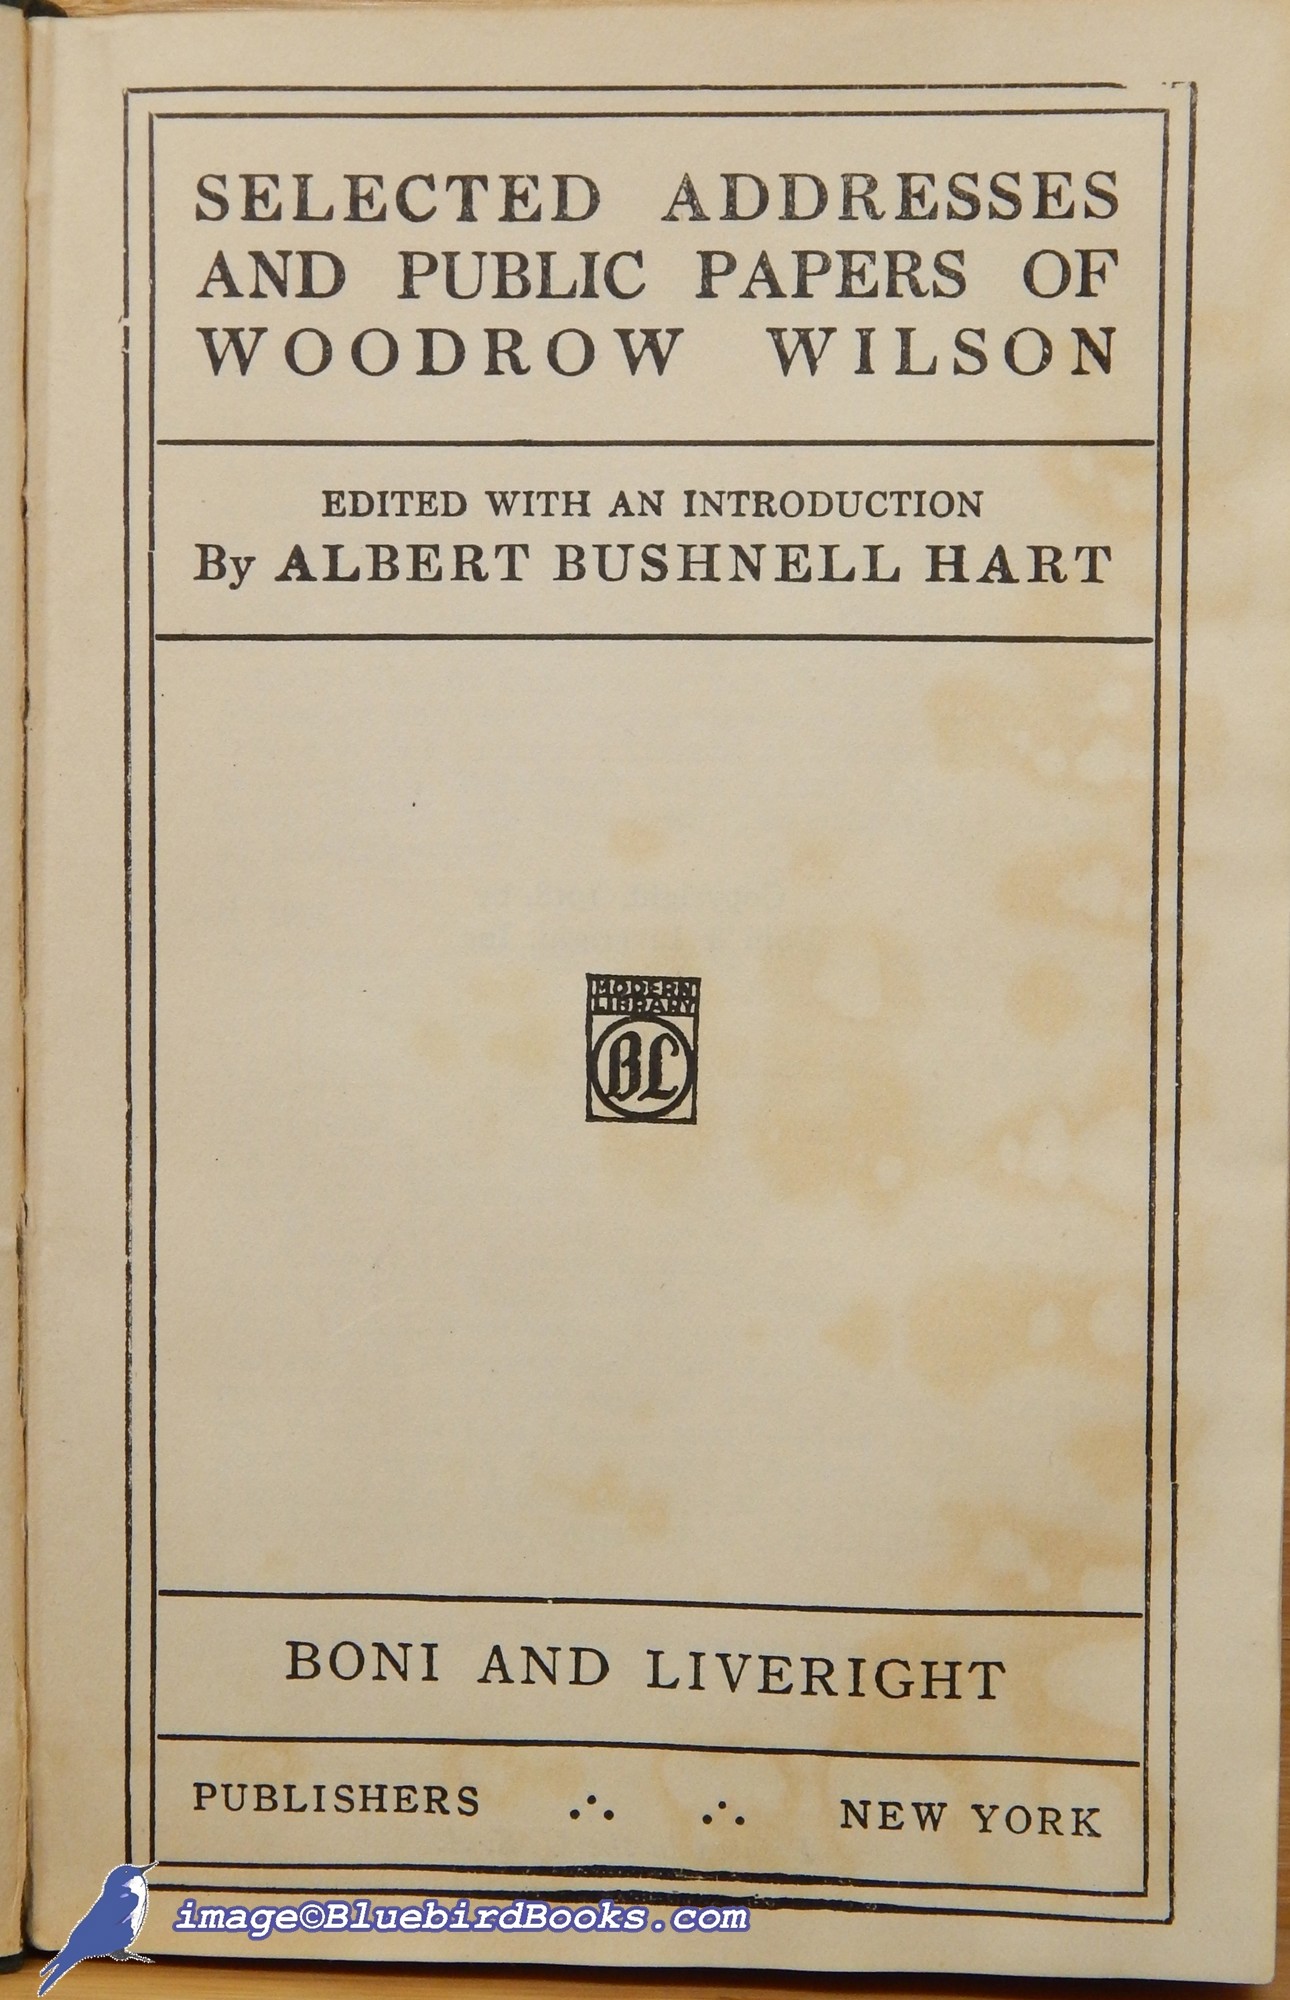 WILSON, WOODROW; HART, ALBERT BUSHNELL (EDITOR) - Selected Addresses and Public Papers of Woodrow Wilson (Modern Library Spine #3, ML #55. 1)